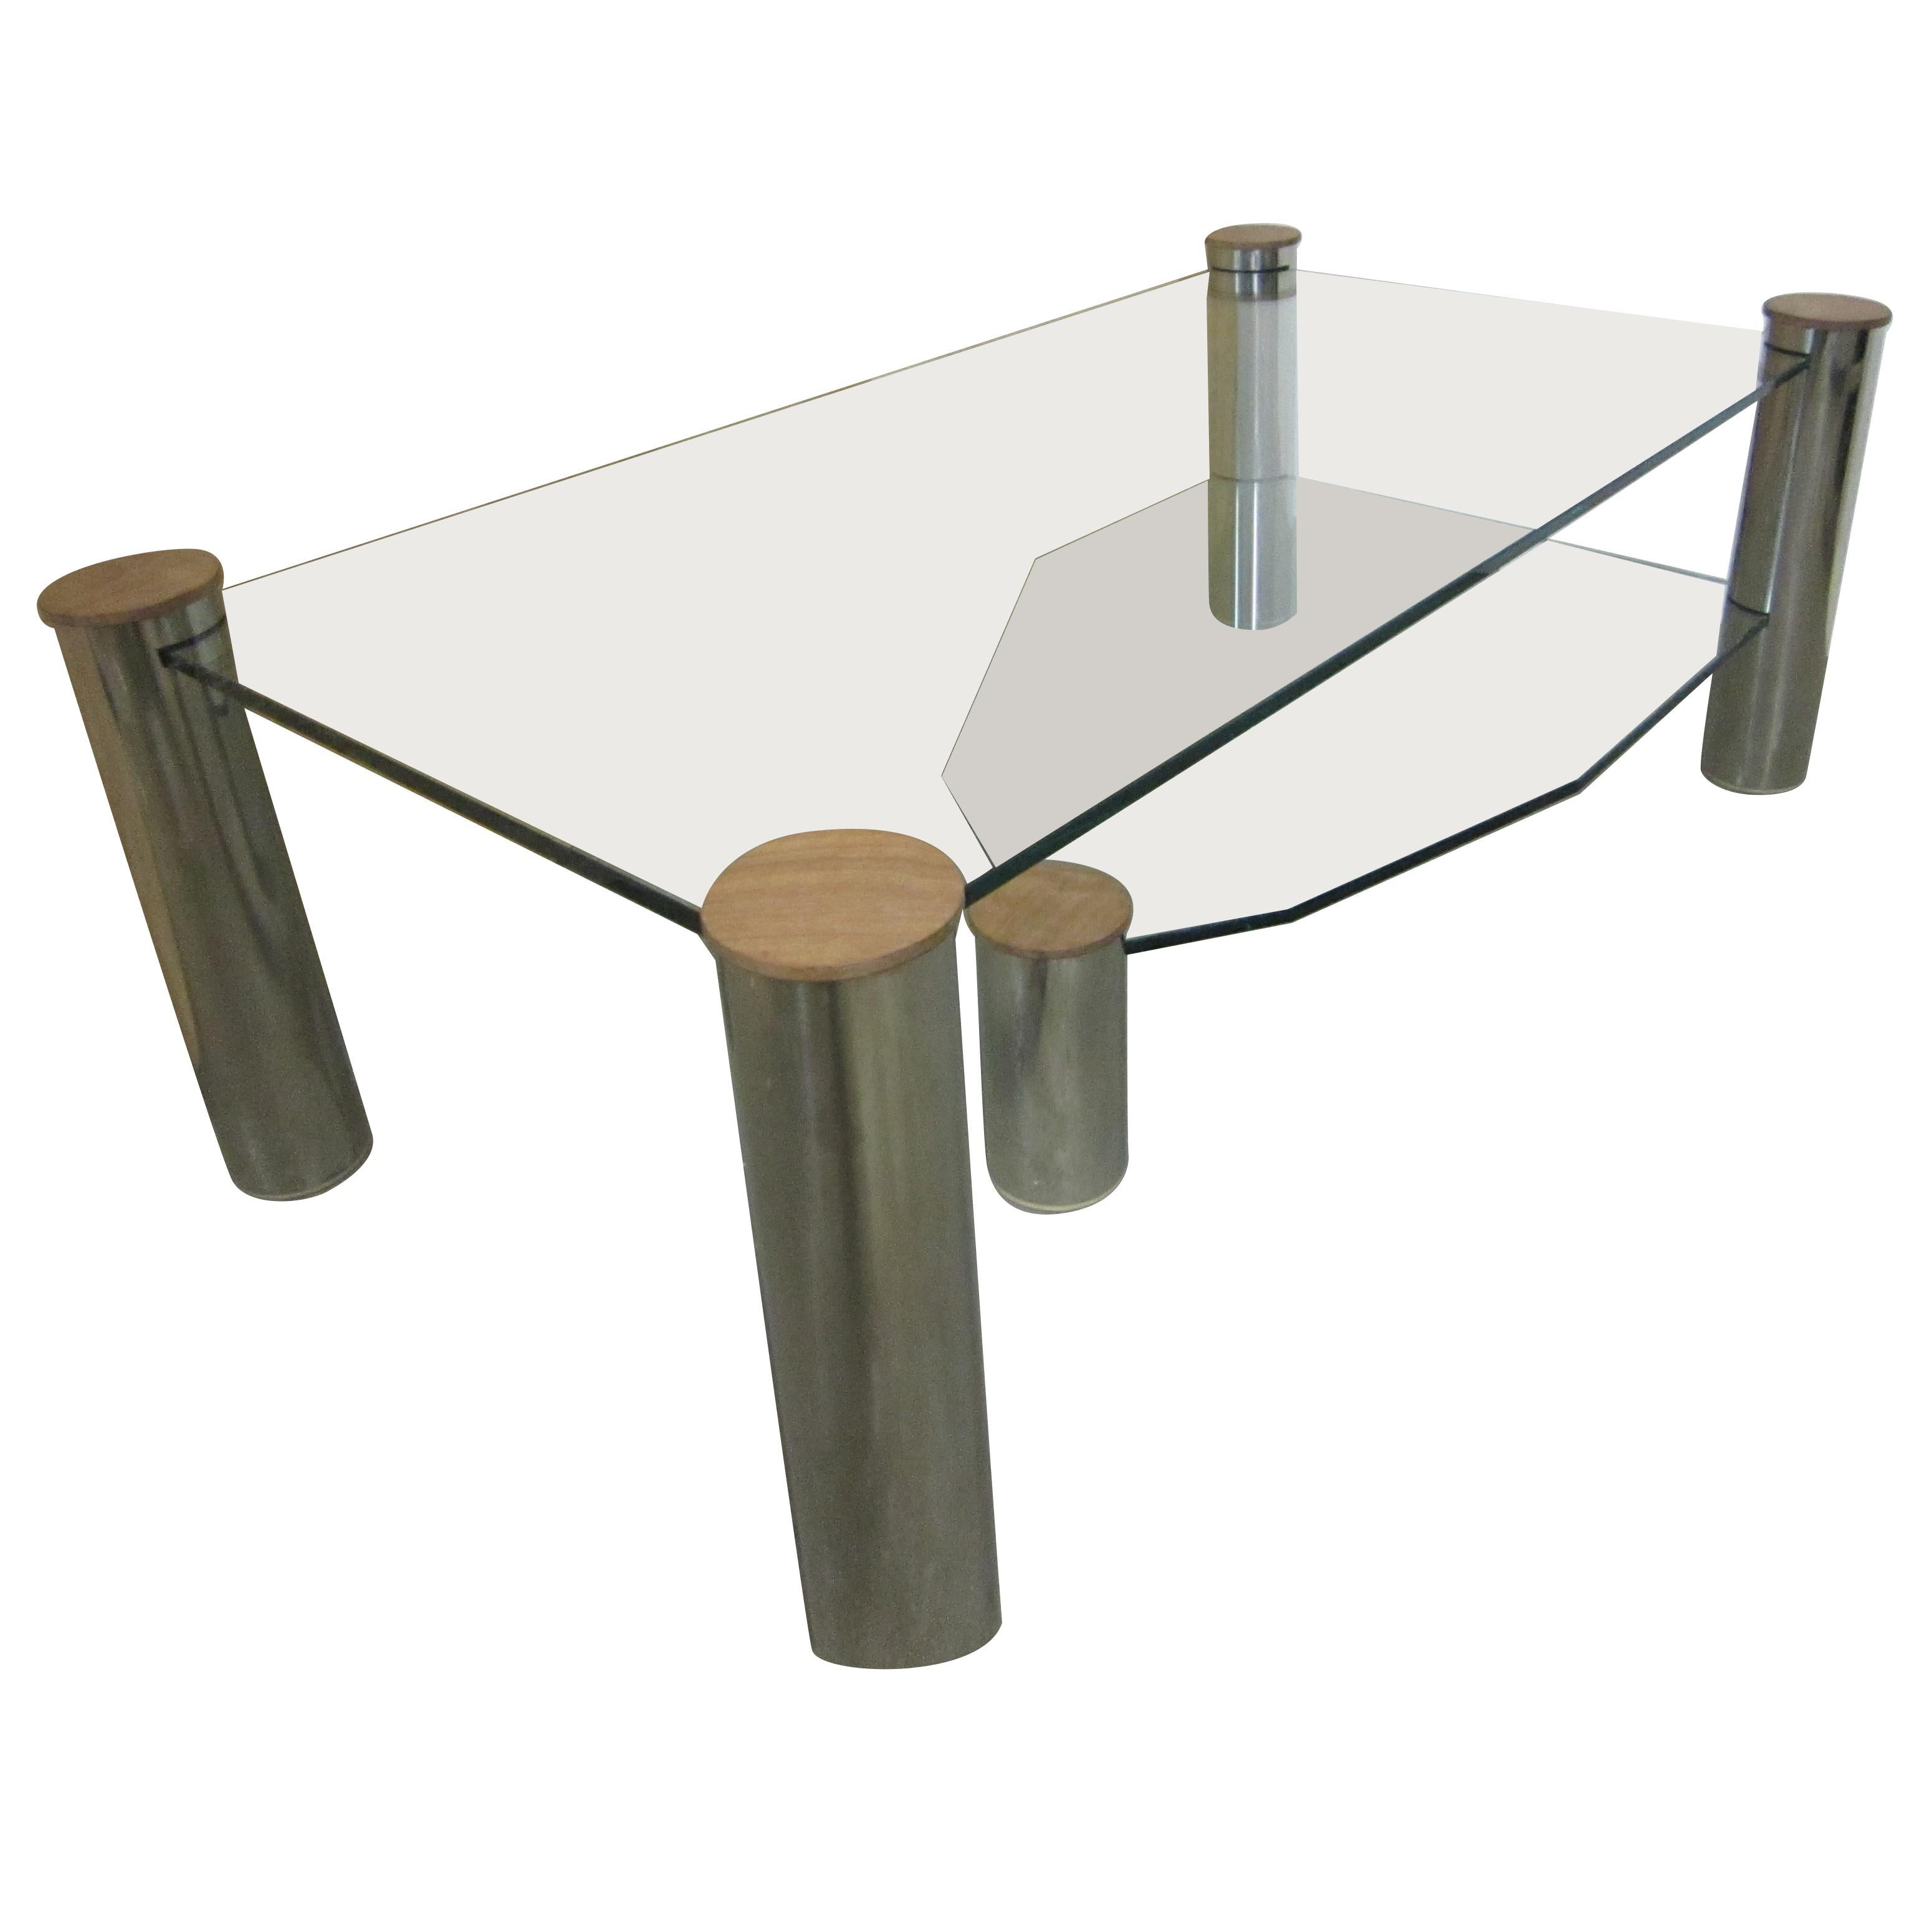 Large Glass and Nickel Coffee Table "Arctic Slab" by Yves Maxx